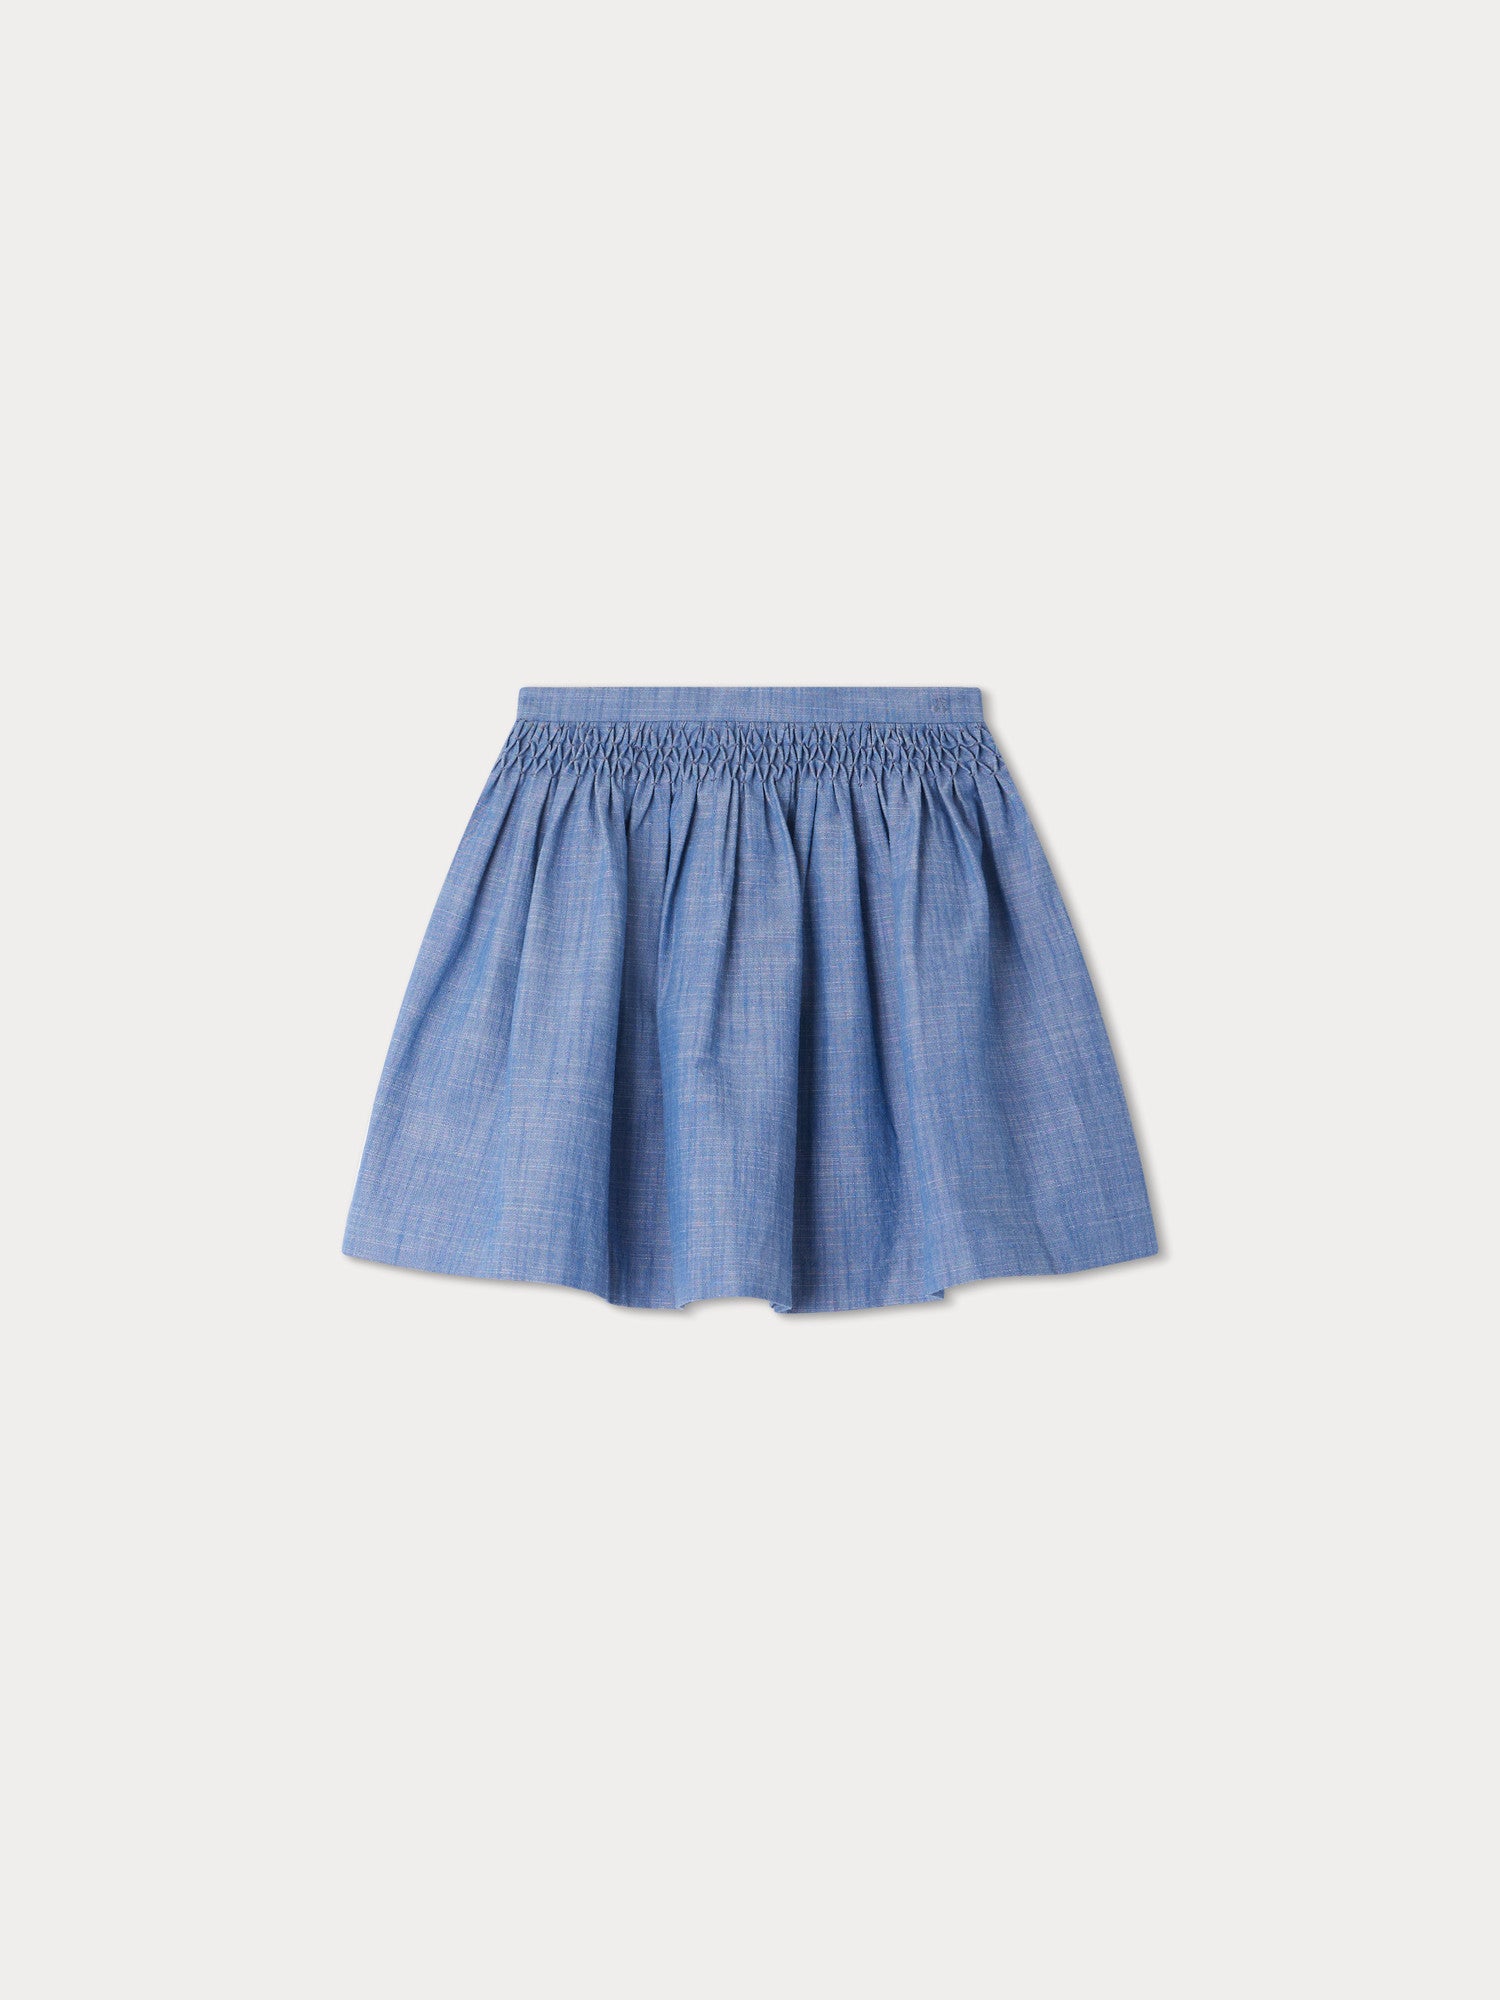 Skirts - Clothing - Girls 2-10 years - Shop by Product - Kids